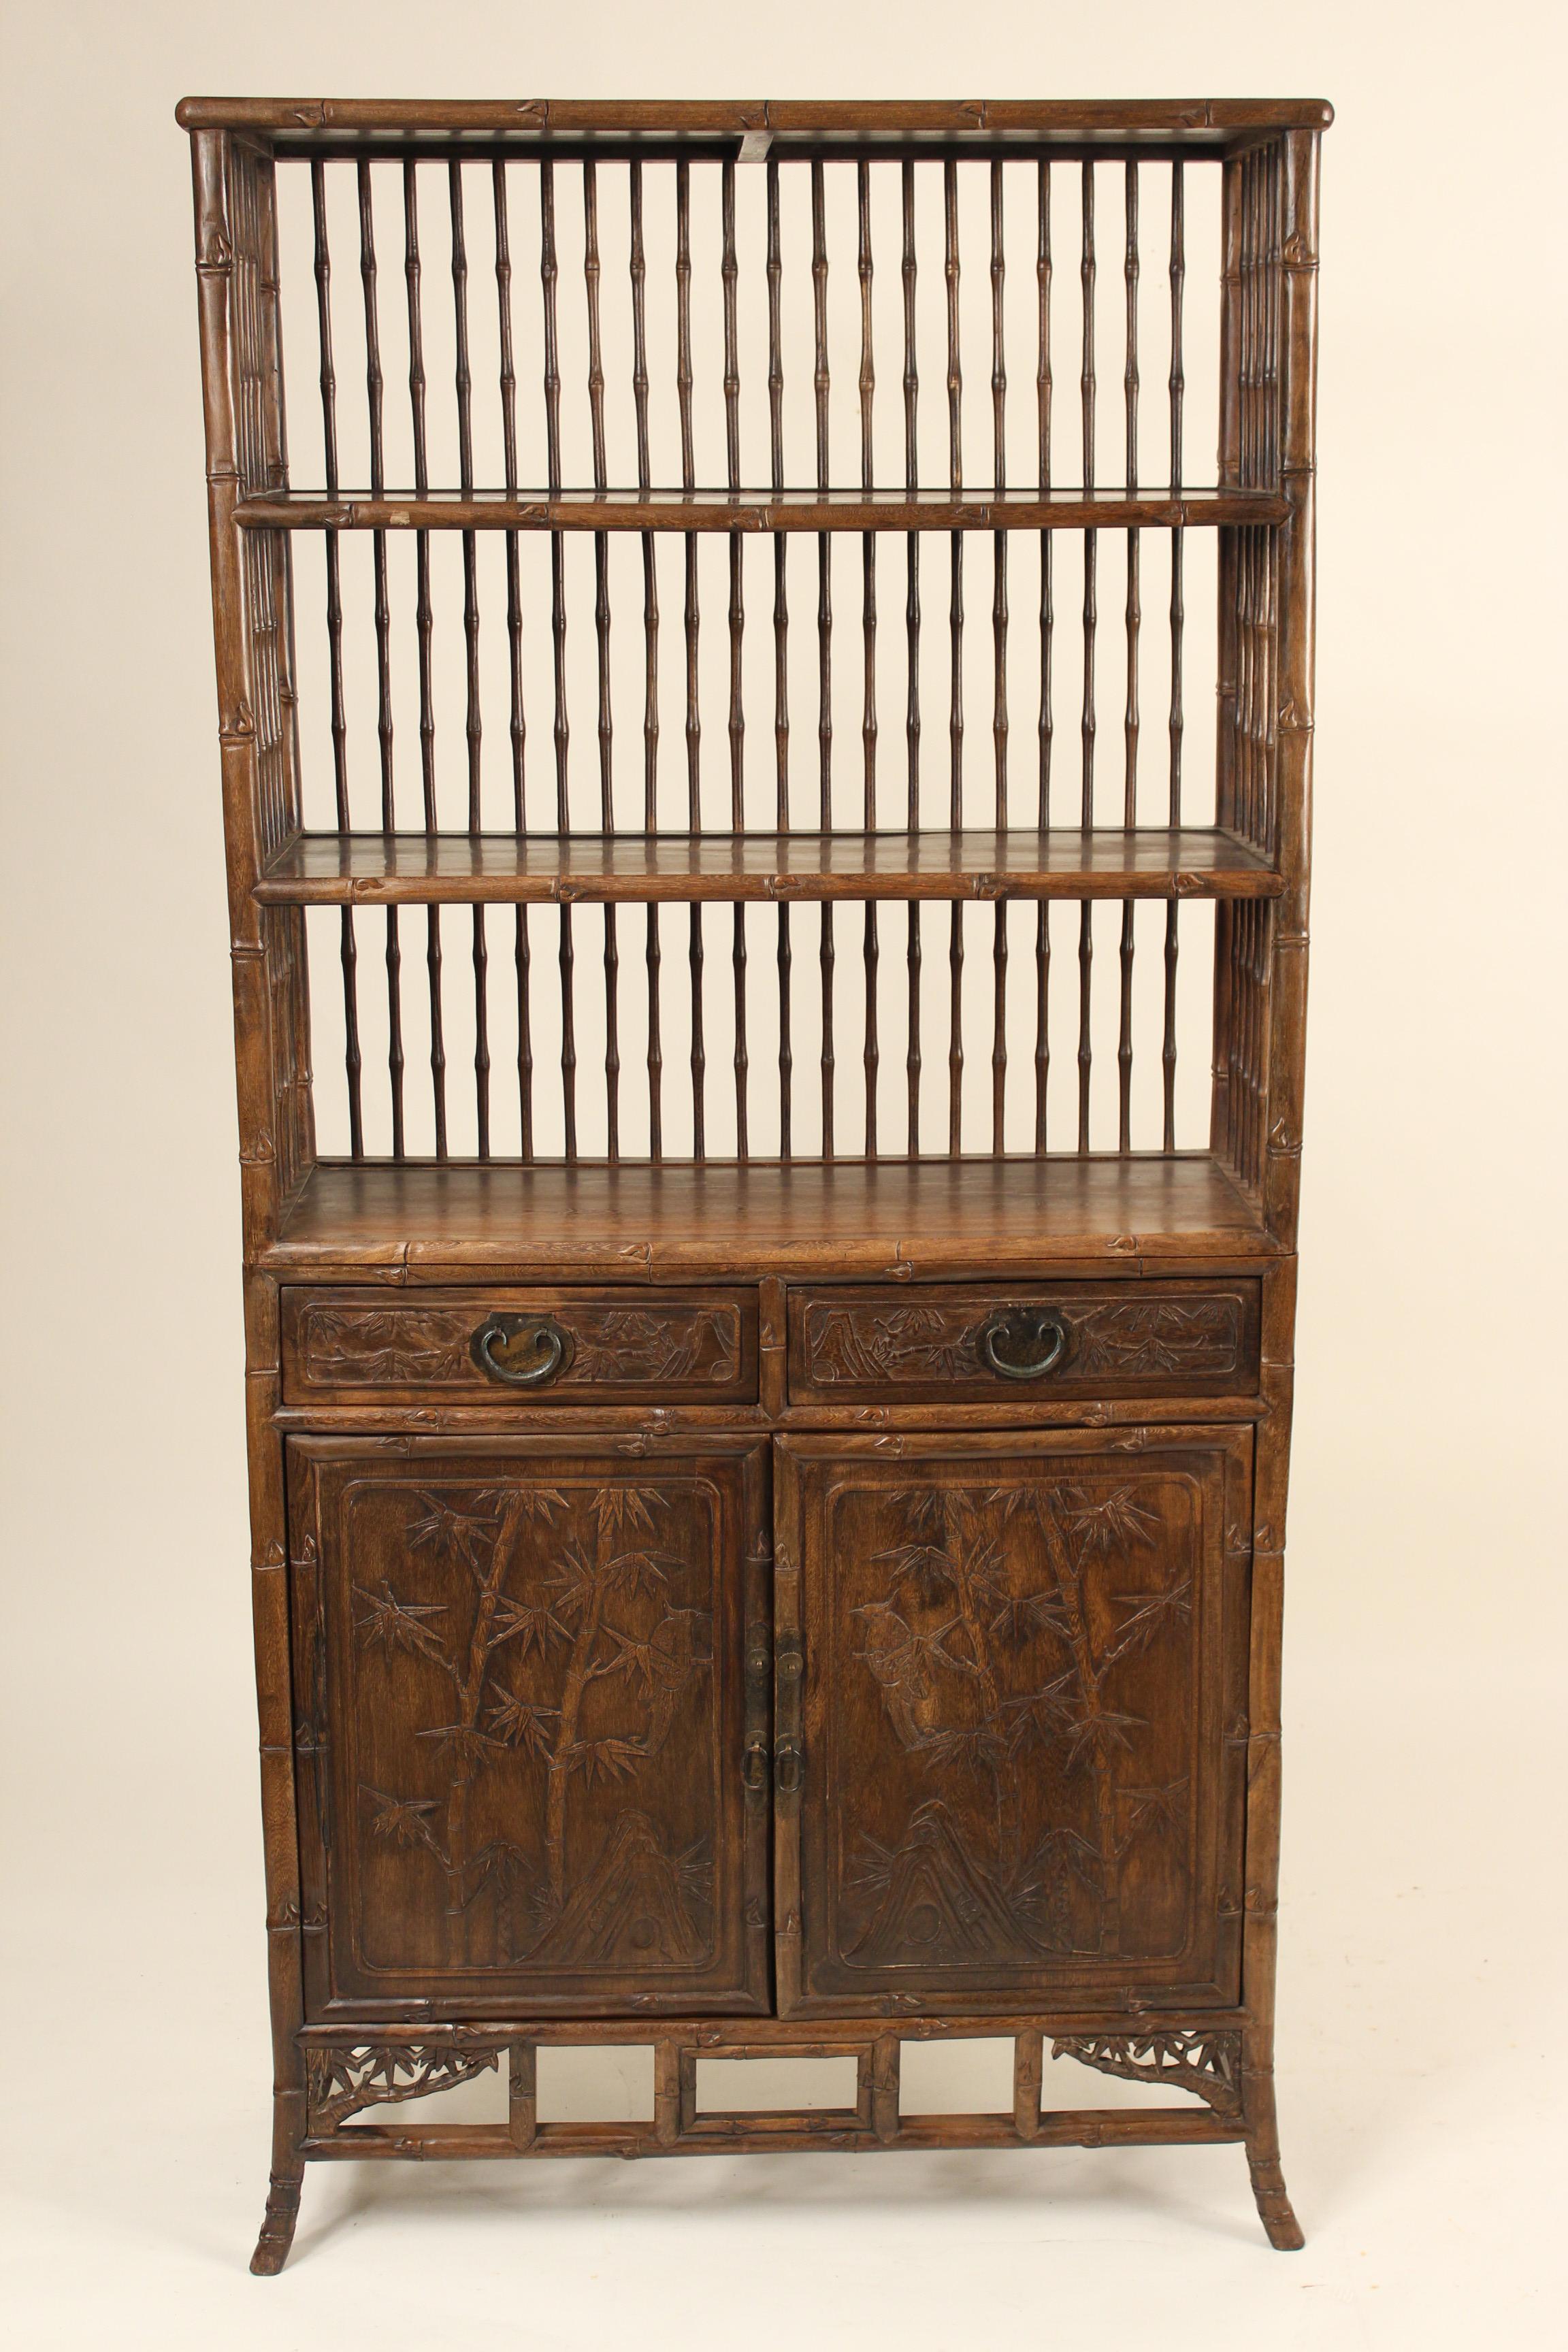 Asian carved two part bookcase, circa 1980s. The width measured from the front feet is 35